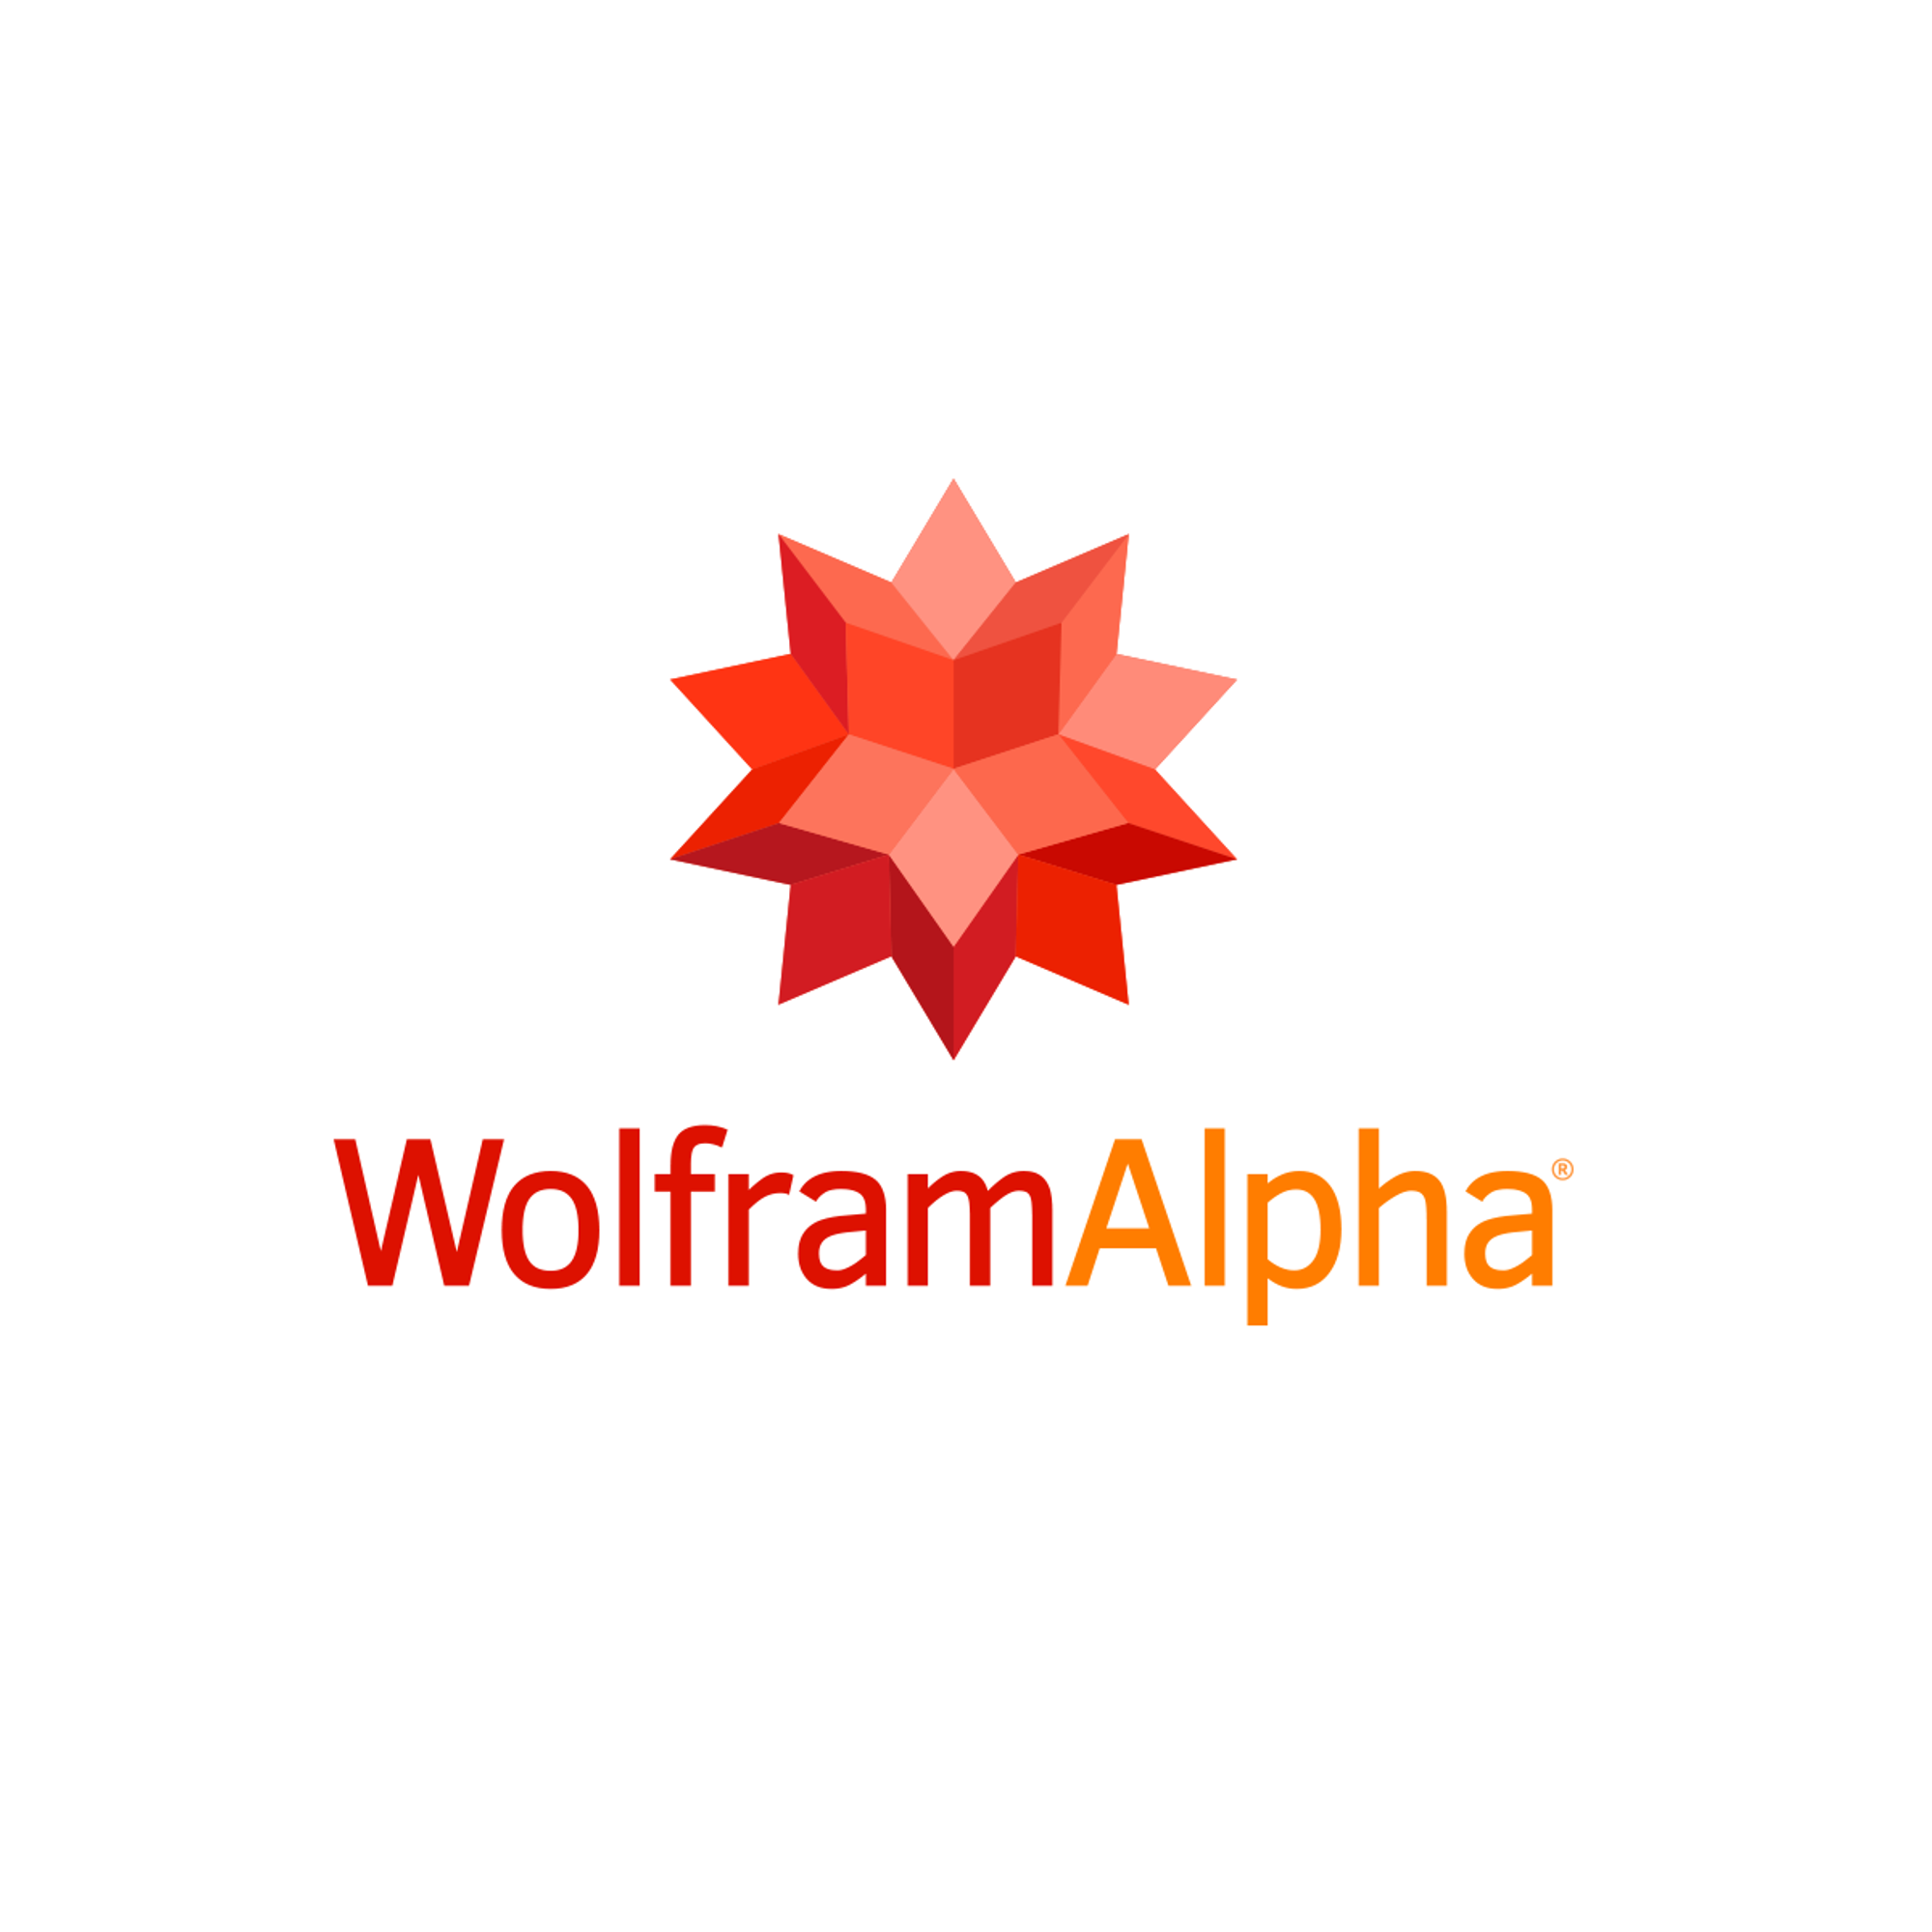 Wolfram|Alpha: Making the world's knowledge computable